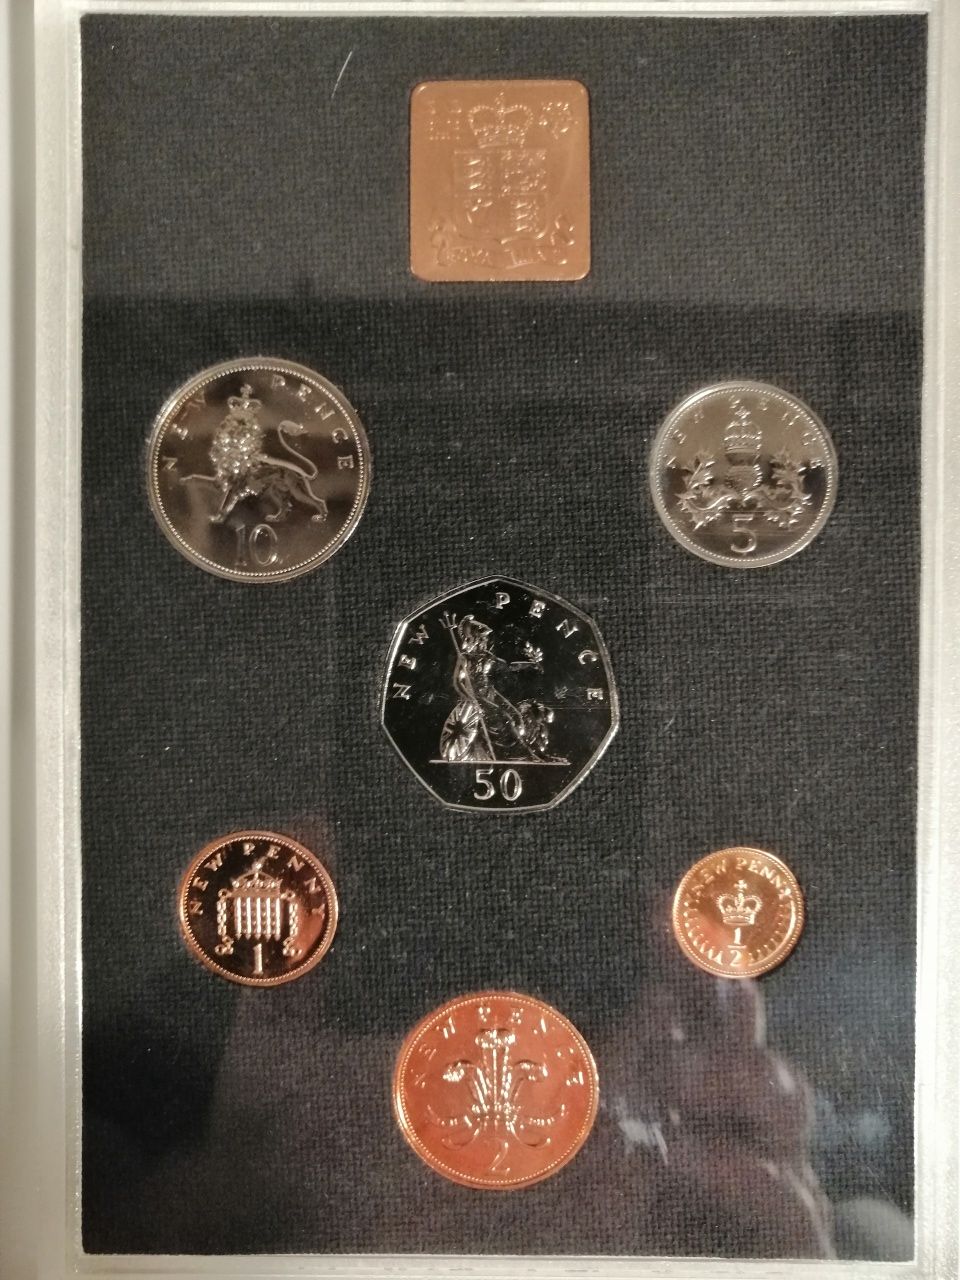 The Decimal Coinage of Great Britain and Northern Ireland 1971